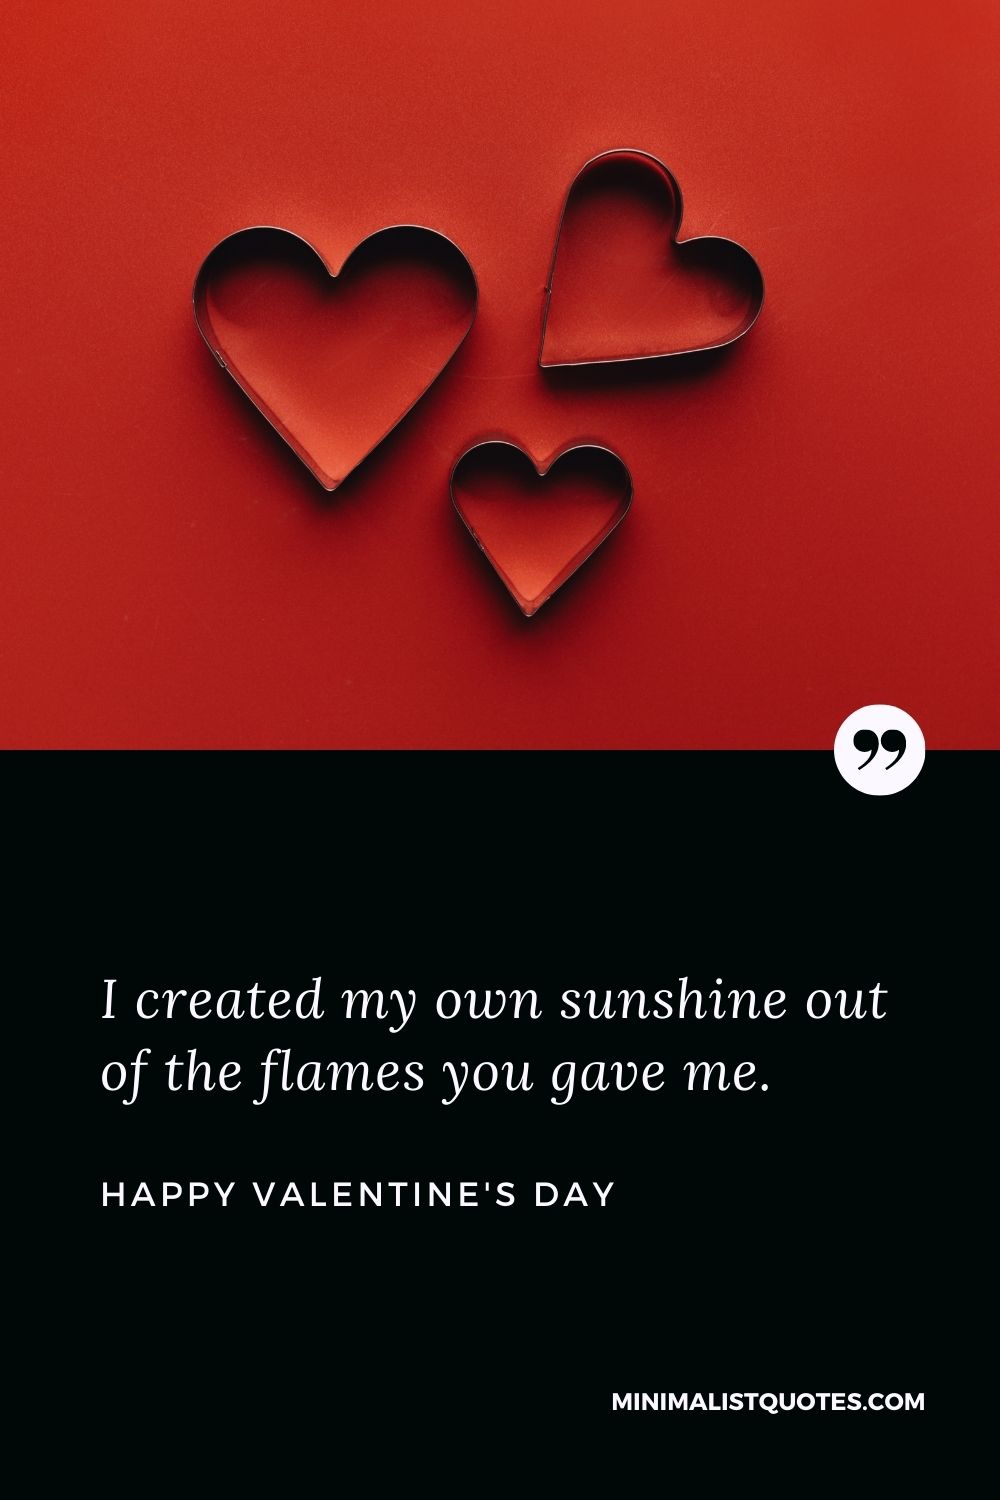 Valentine's Day Wish & Message: I created my own sunshine out of the flames you gave me.